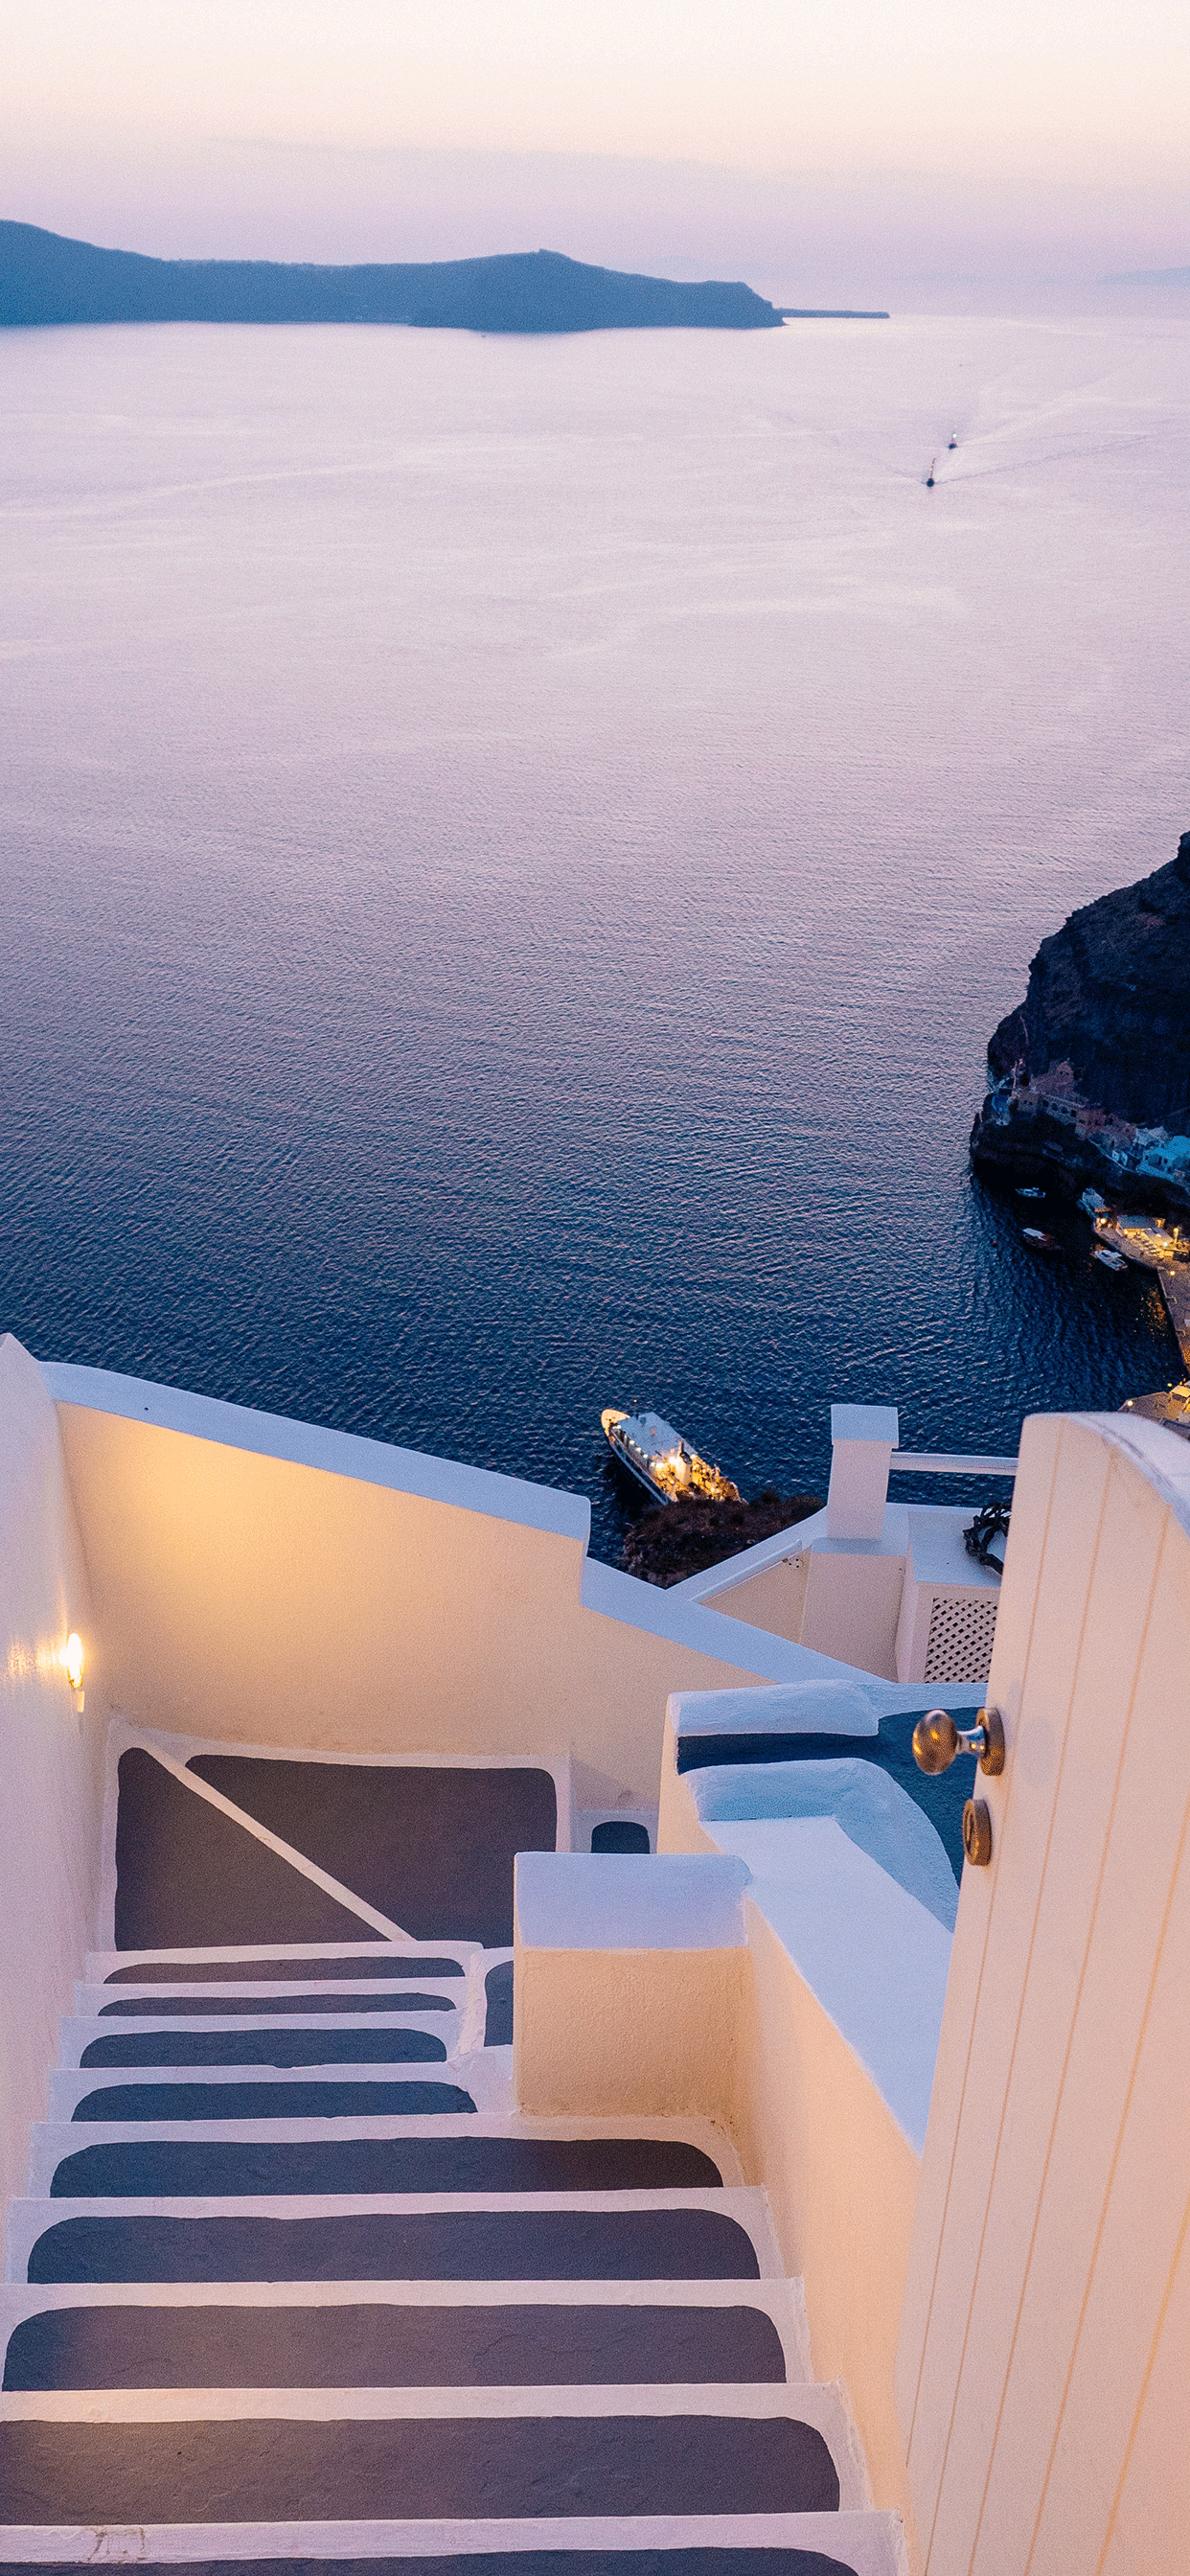 Greece Wallpaper For Iphone X 8 7 6 Free Download On - Santorini Greece Wallpaper Iphone , HD Wallpaper & Backgrounds